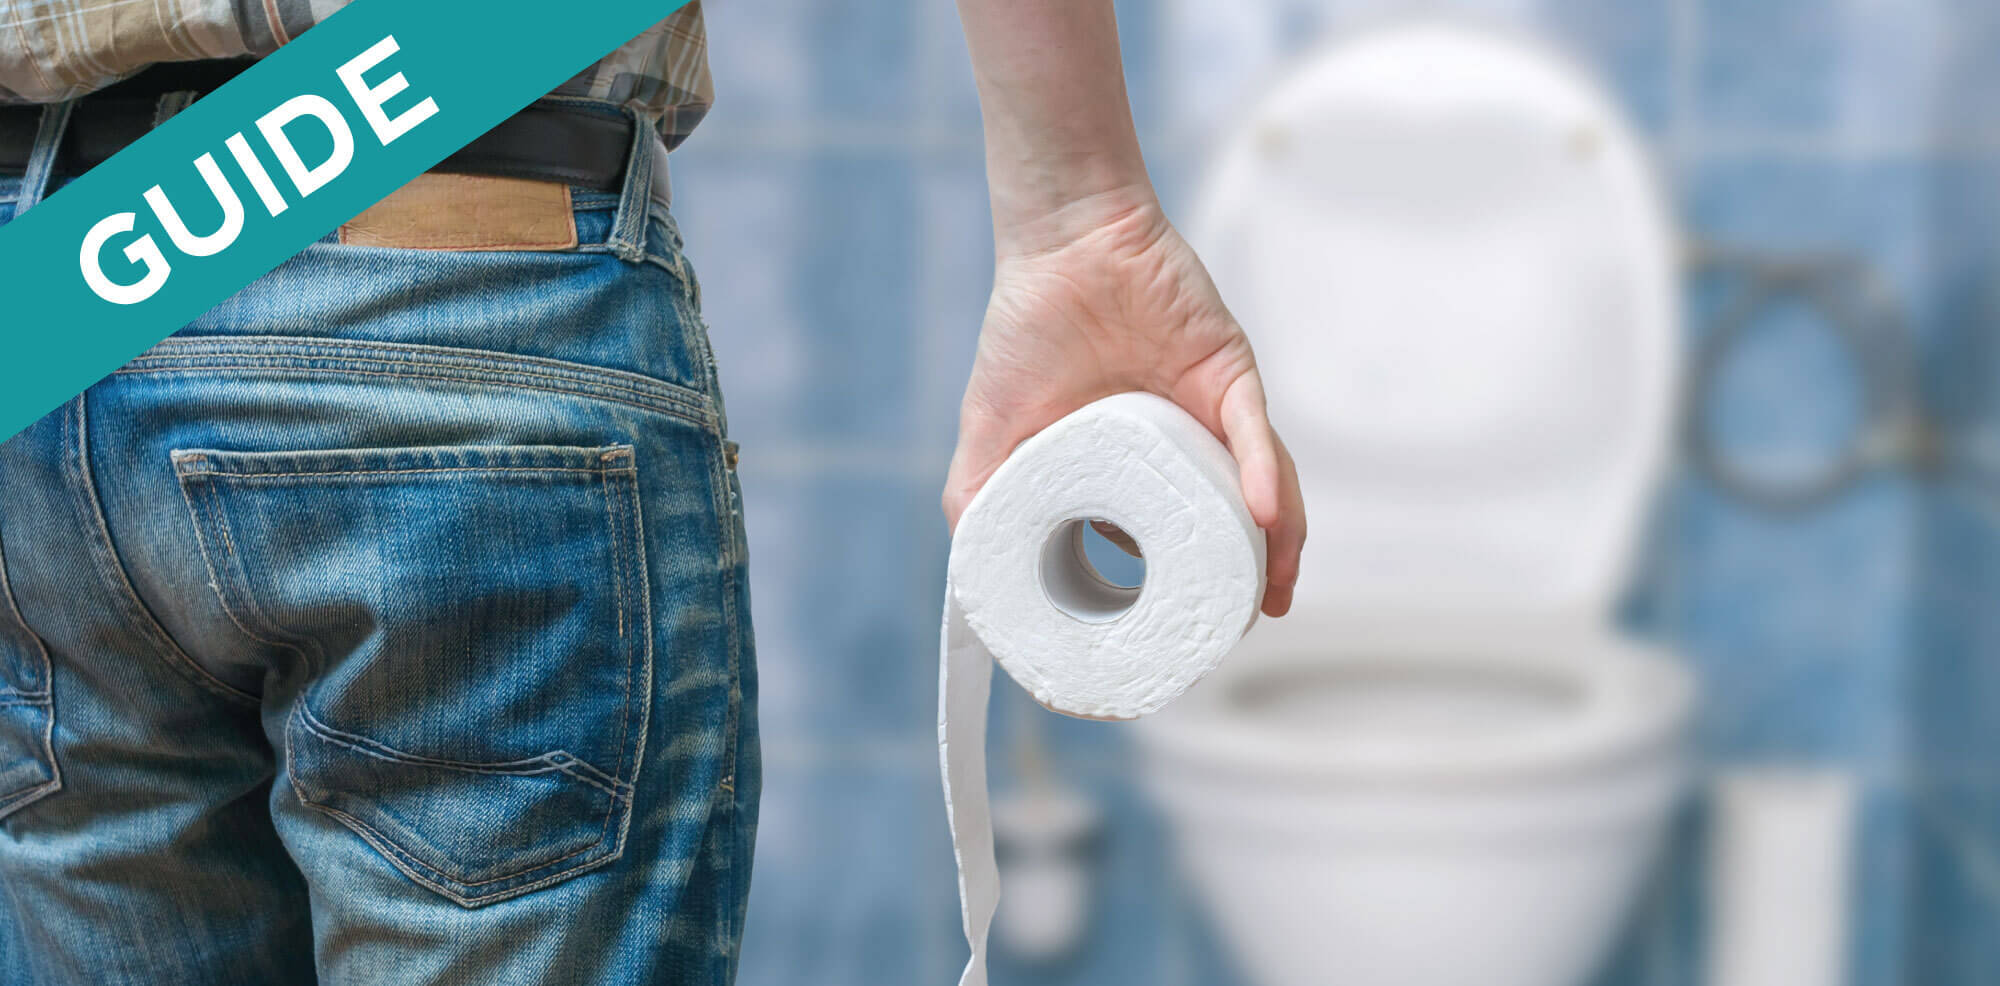 What can I flush down my RV Toilet - Flushable wipes, tampons, condoms, poop, pee, urine, rv toilet paper